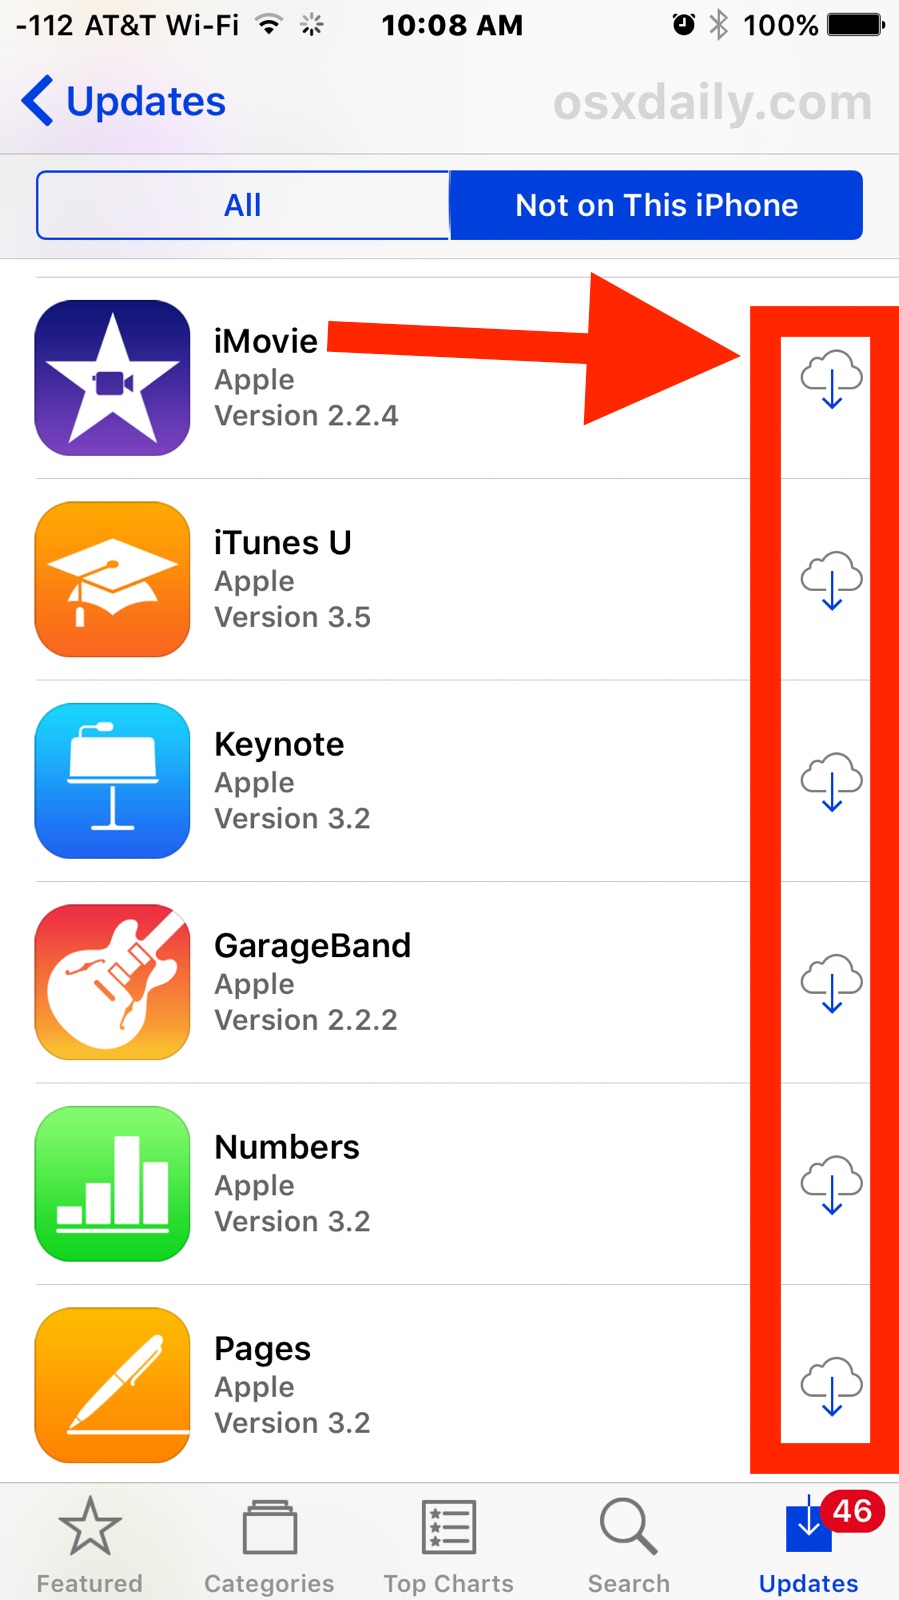 Redownload previously purchased apps that are not on the iOS device